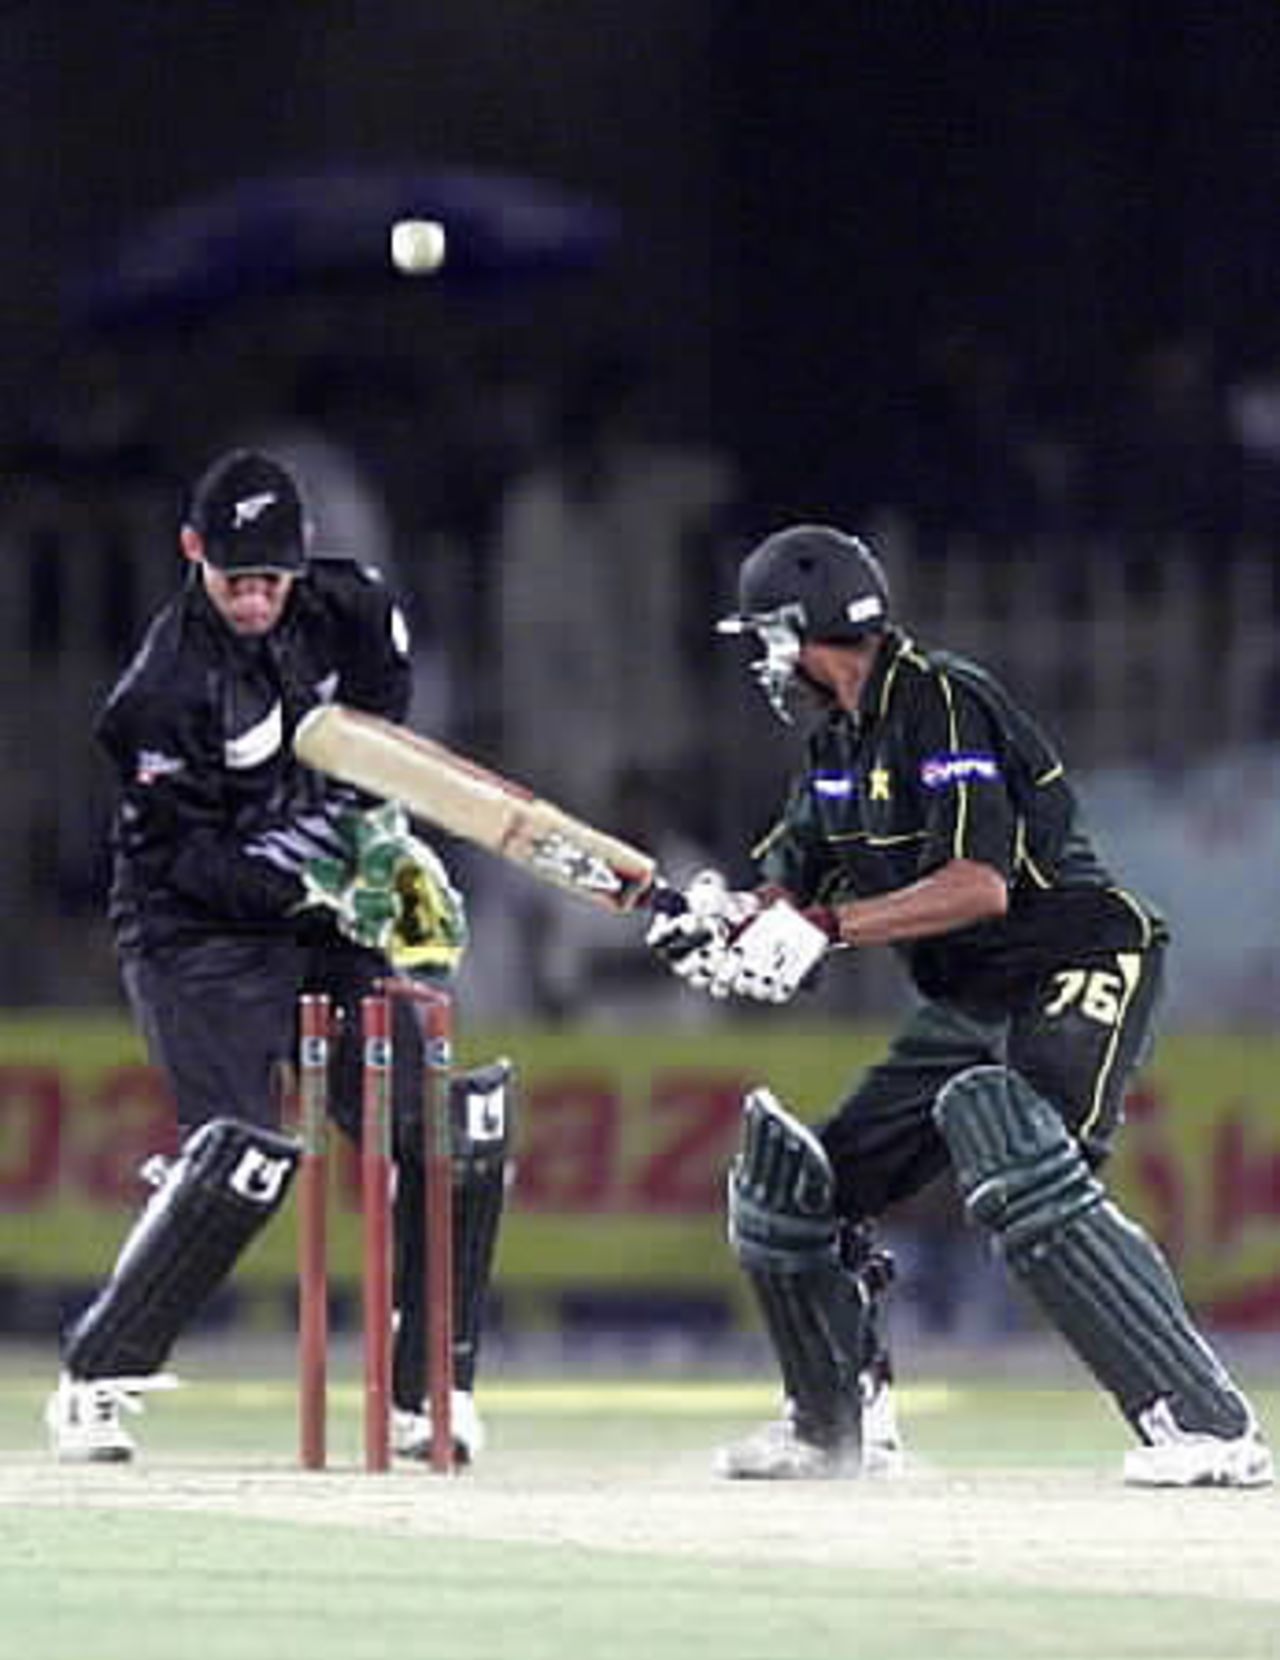 Younis Khan plays on as Robbie Hart watches, after his knock of 70 - ODI2 at Rawalpindi, New Zealand v Pakistan, 24 Apr 2002